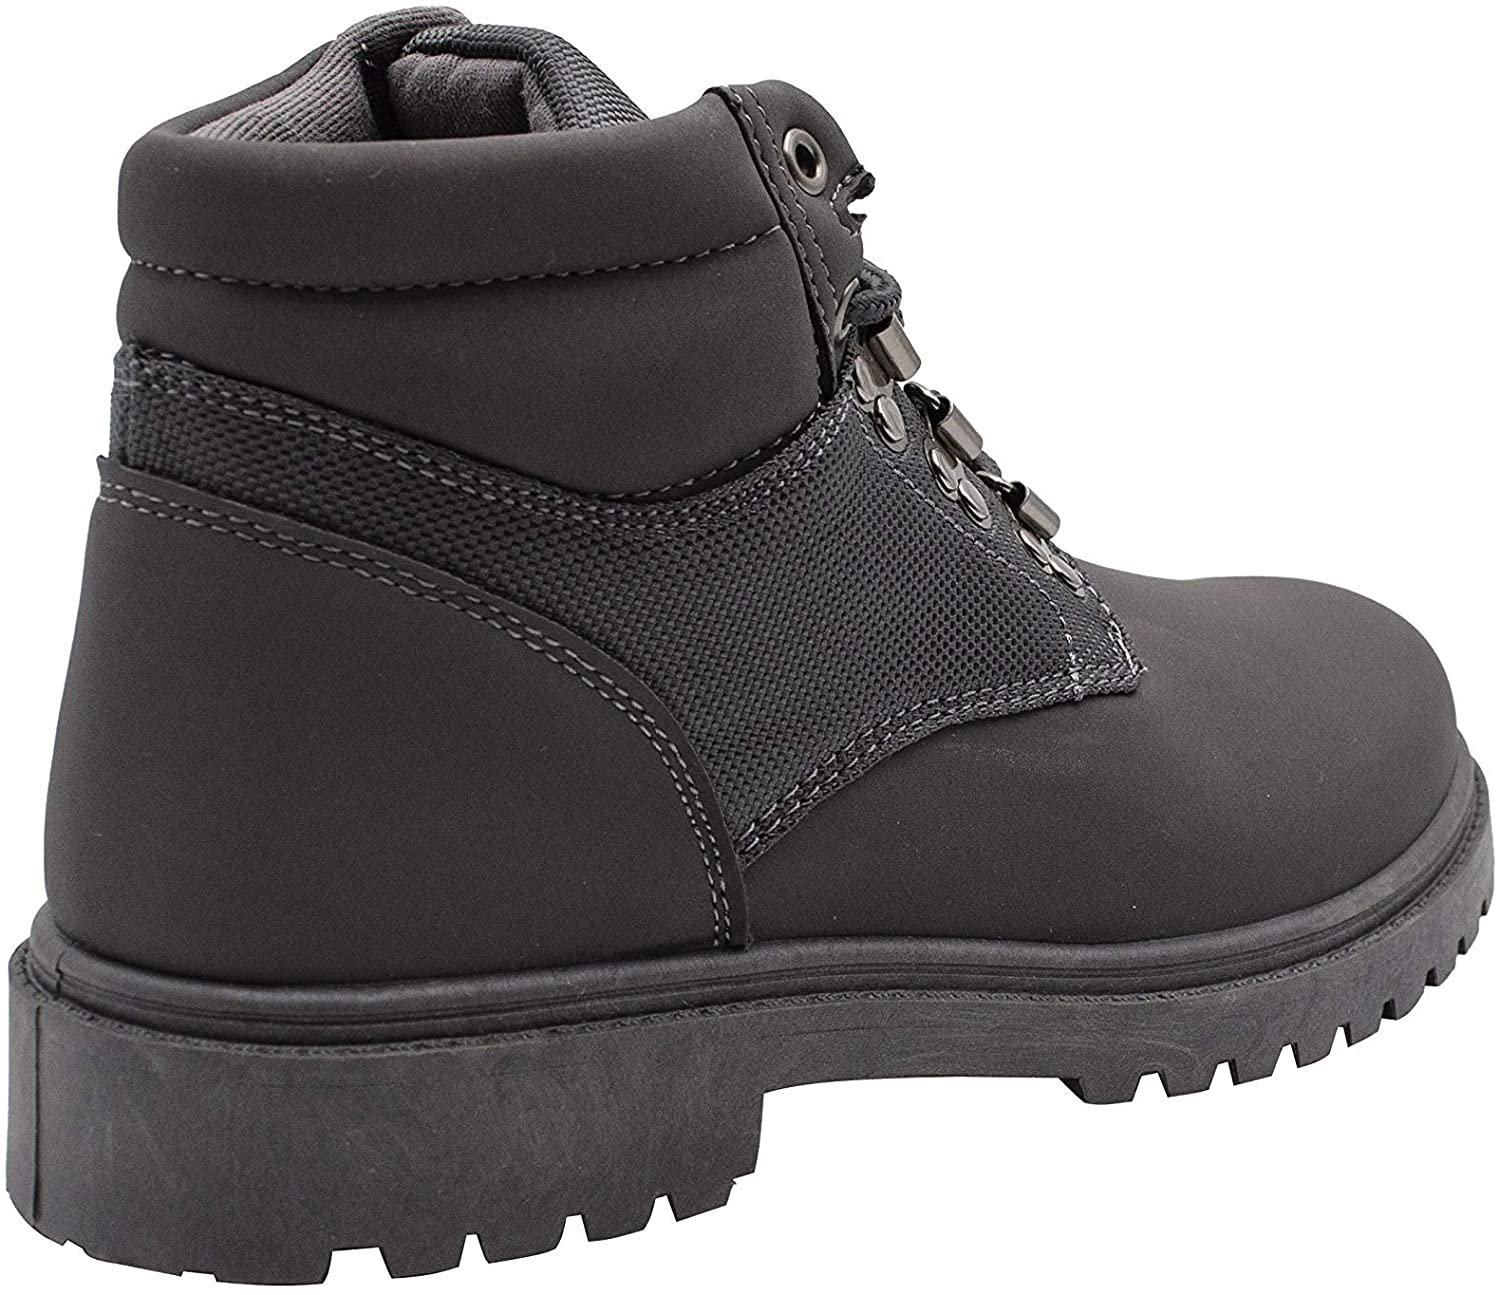 Gold Toe Men’s Lace-Up Nubuck Work Boots, Outdoor Hiking Comfort Fall Winter Shoes - image 3 of 4